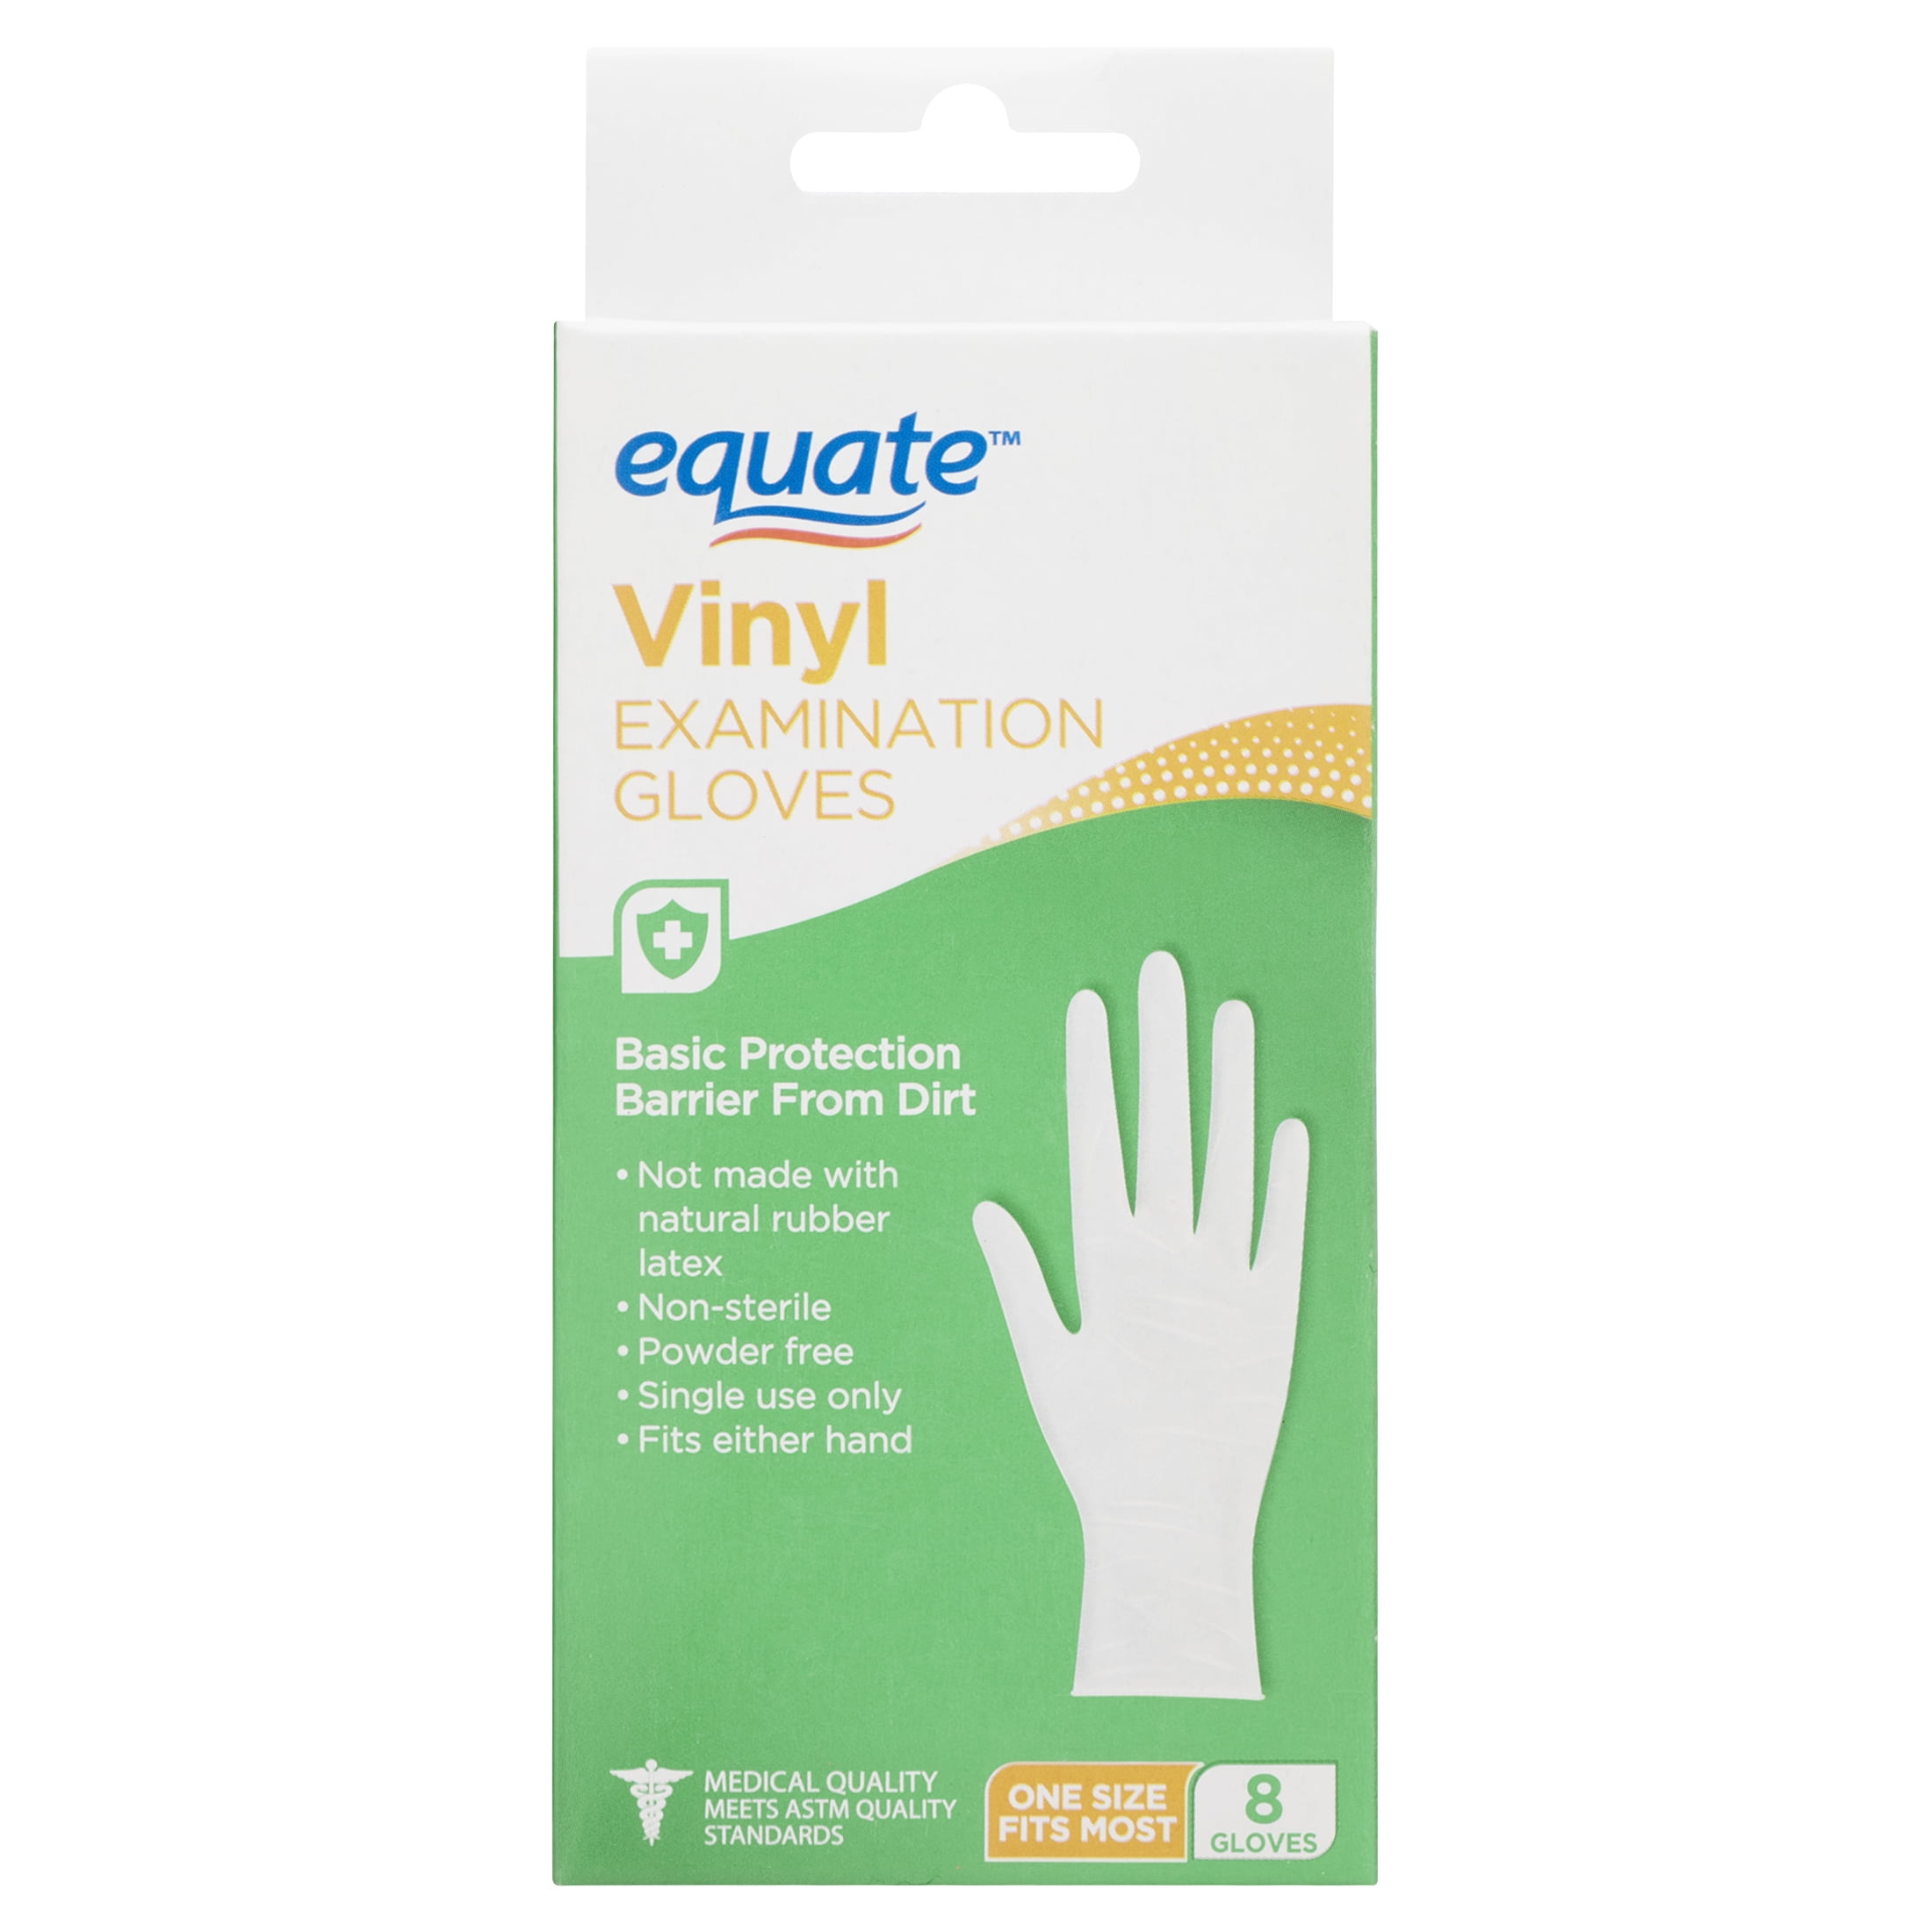 Equate Vinyl Examination Gloves, One Size, 8 Count